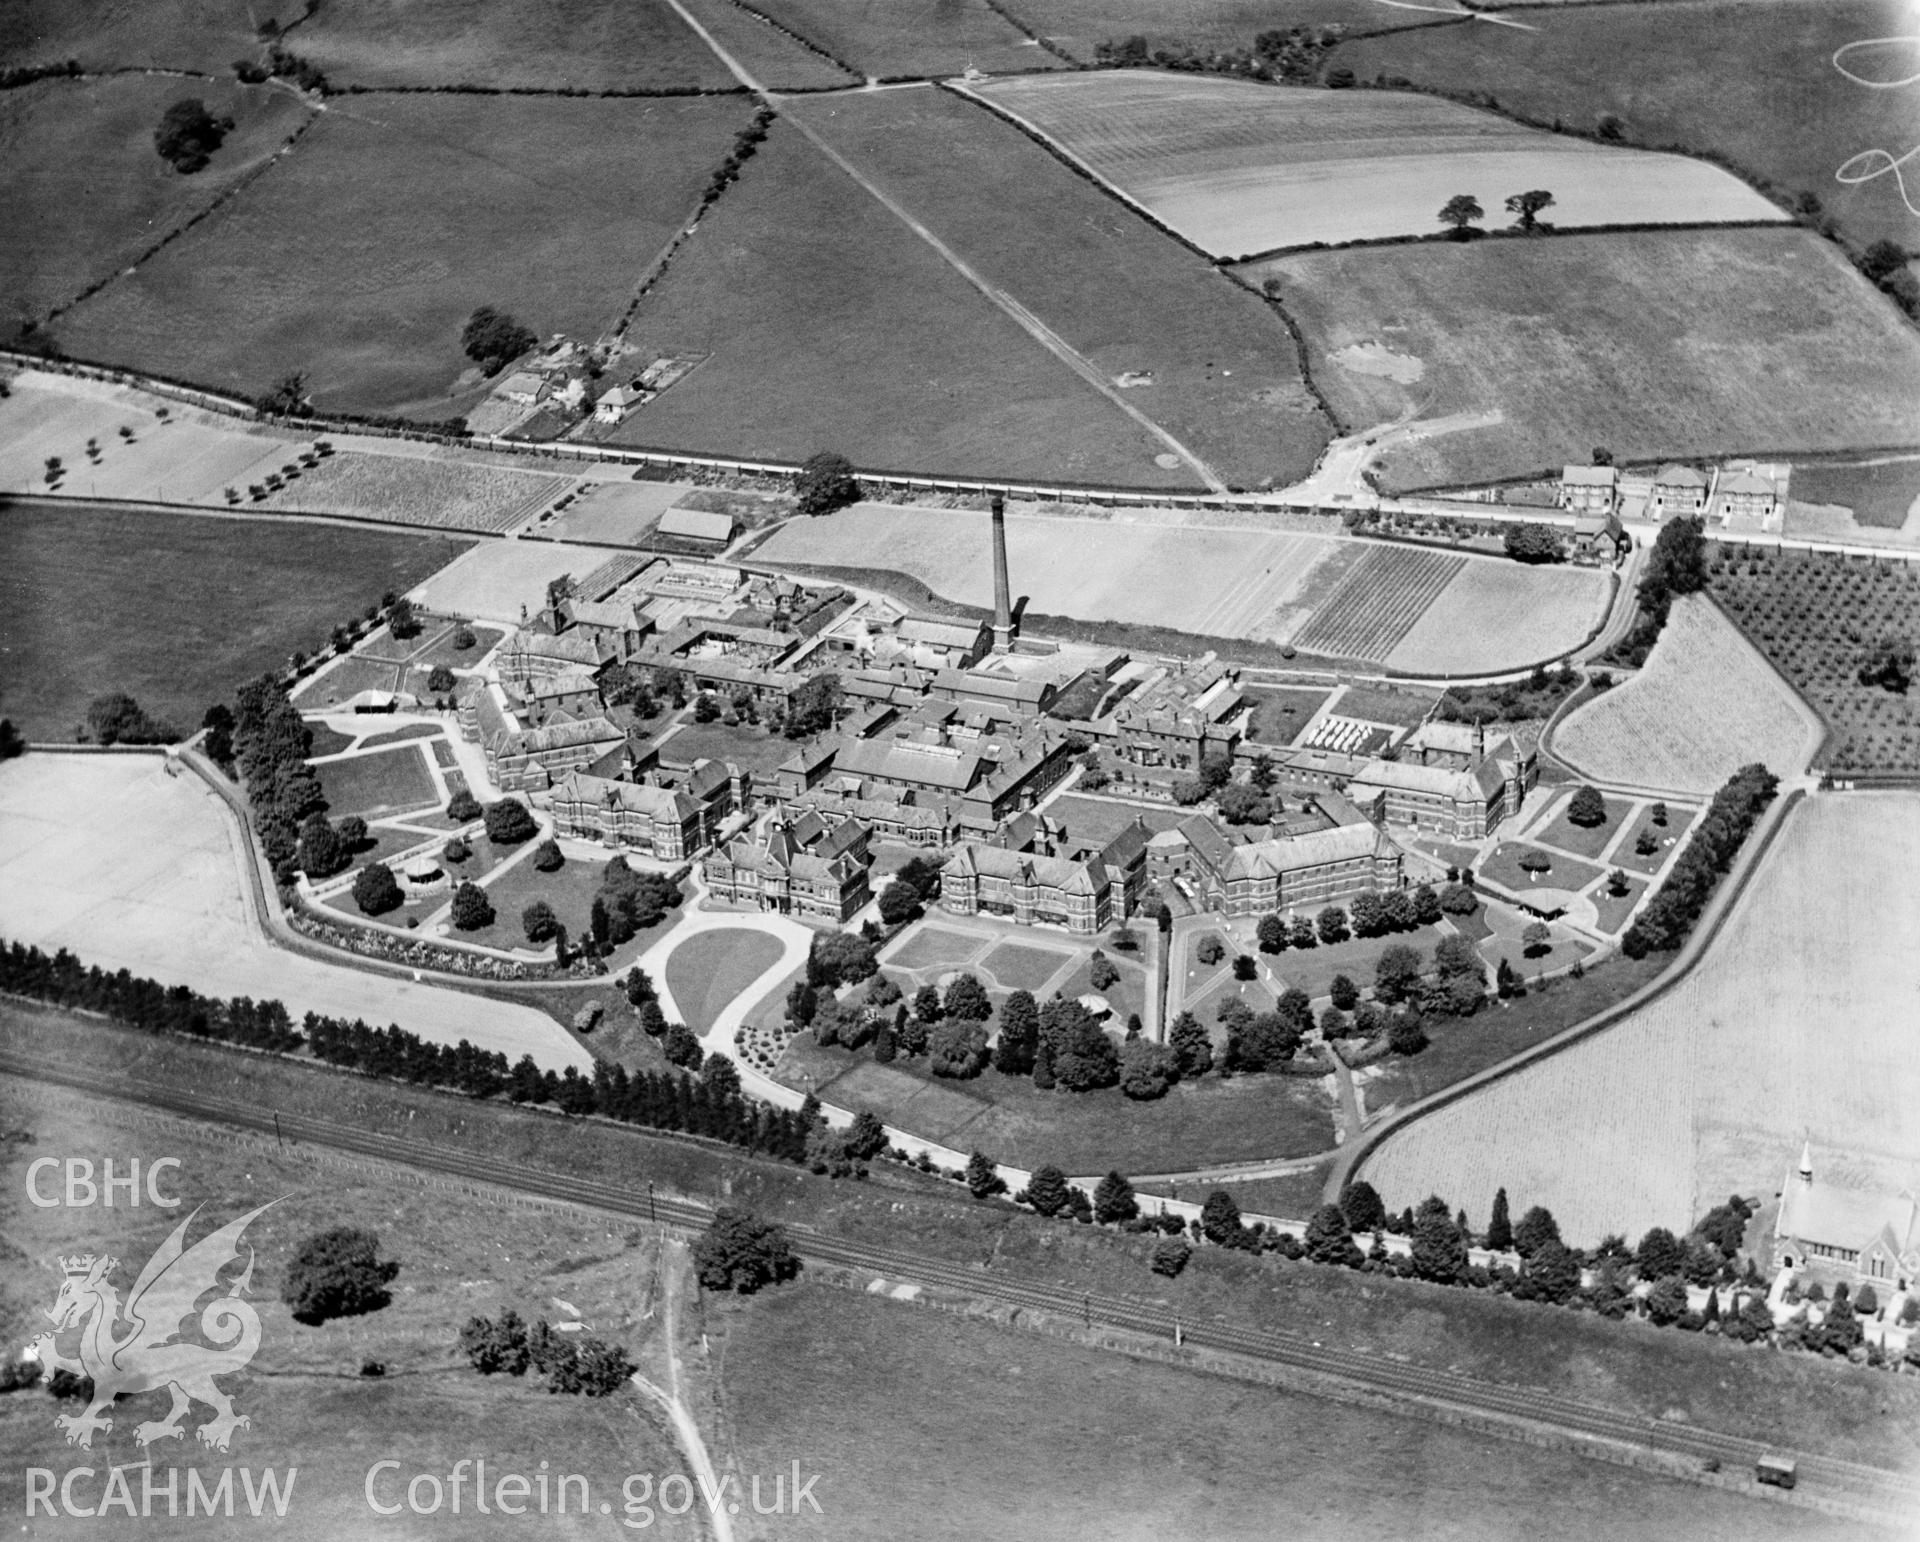 View of Newport Mental Hospital, Caerleon, oblique aerial view. 5?x4? black and white glass plate negative.